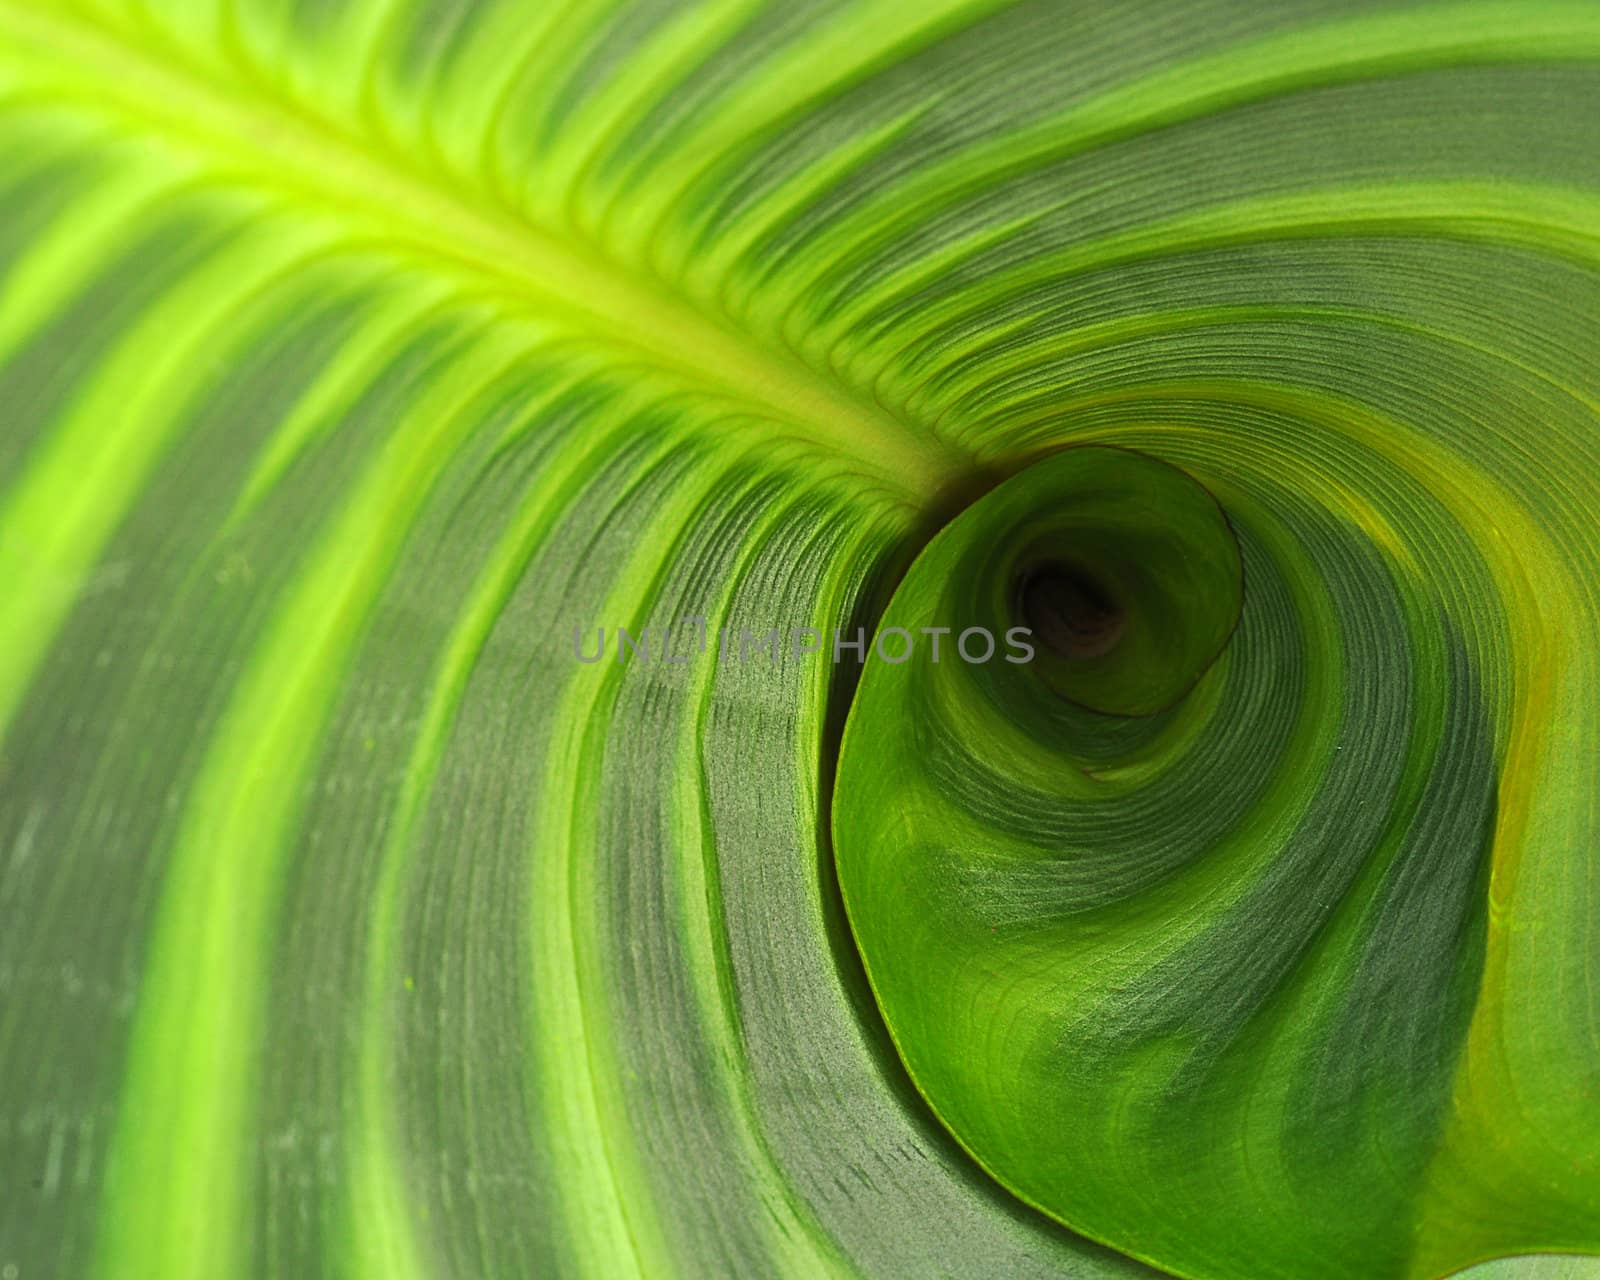 A broad two toned leaf spiraling to the center.